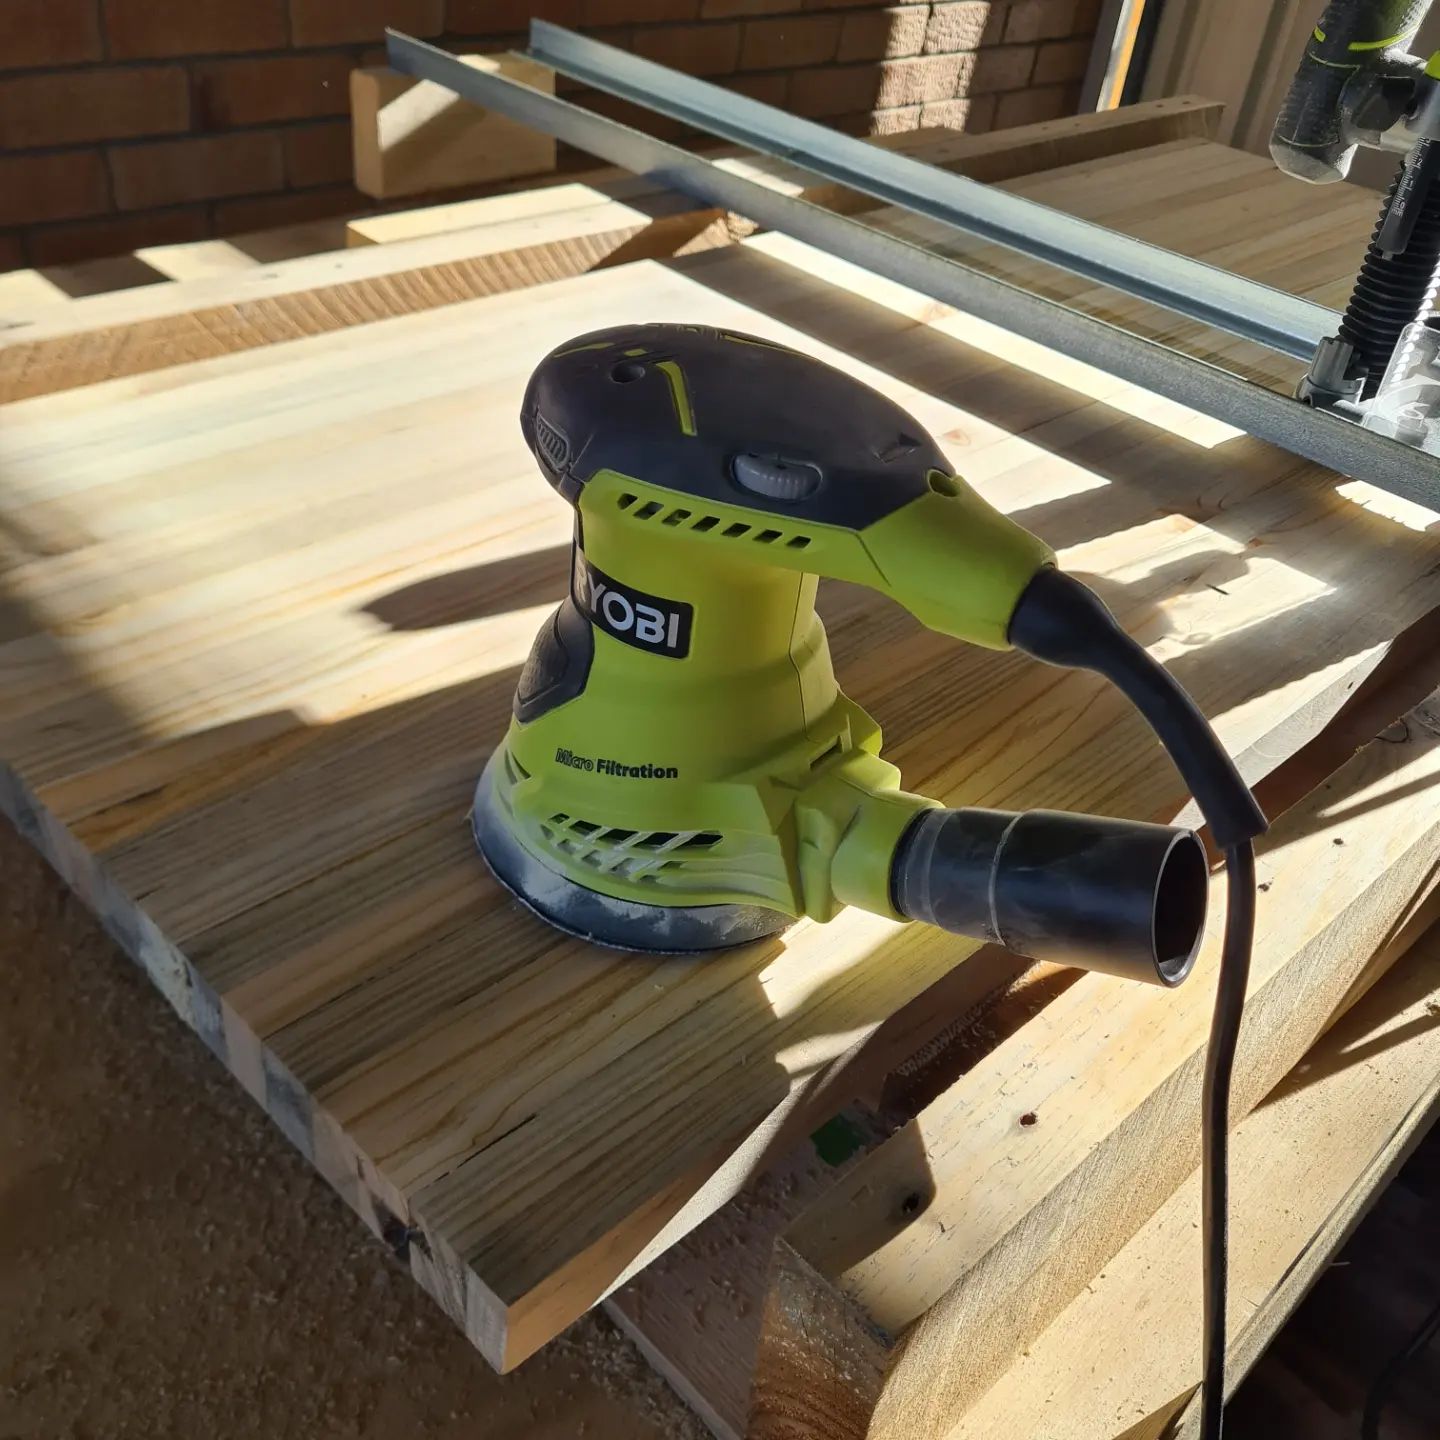 Built a very quick router sled using some 25x25 galv angle screwd to some 2x4 blocks as end stoppers. The base is just 2 pallet rails cleaned up in the thicknesser screwed to some scrap 15mm ply.

Using a half inch plain router bit in the ryobiau 1600w planer made for slow going, but it did do a respectable job considering. First sanding pass done and this pine pallet wood coffee table top is on it's way to being mated to a base (yet to be designed and made)